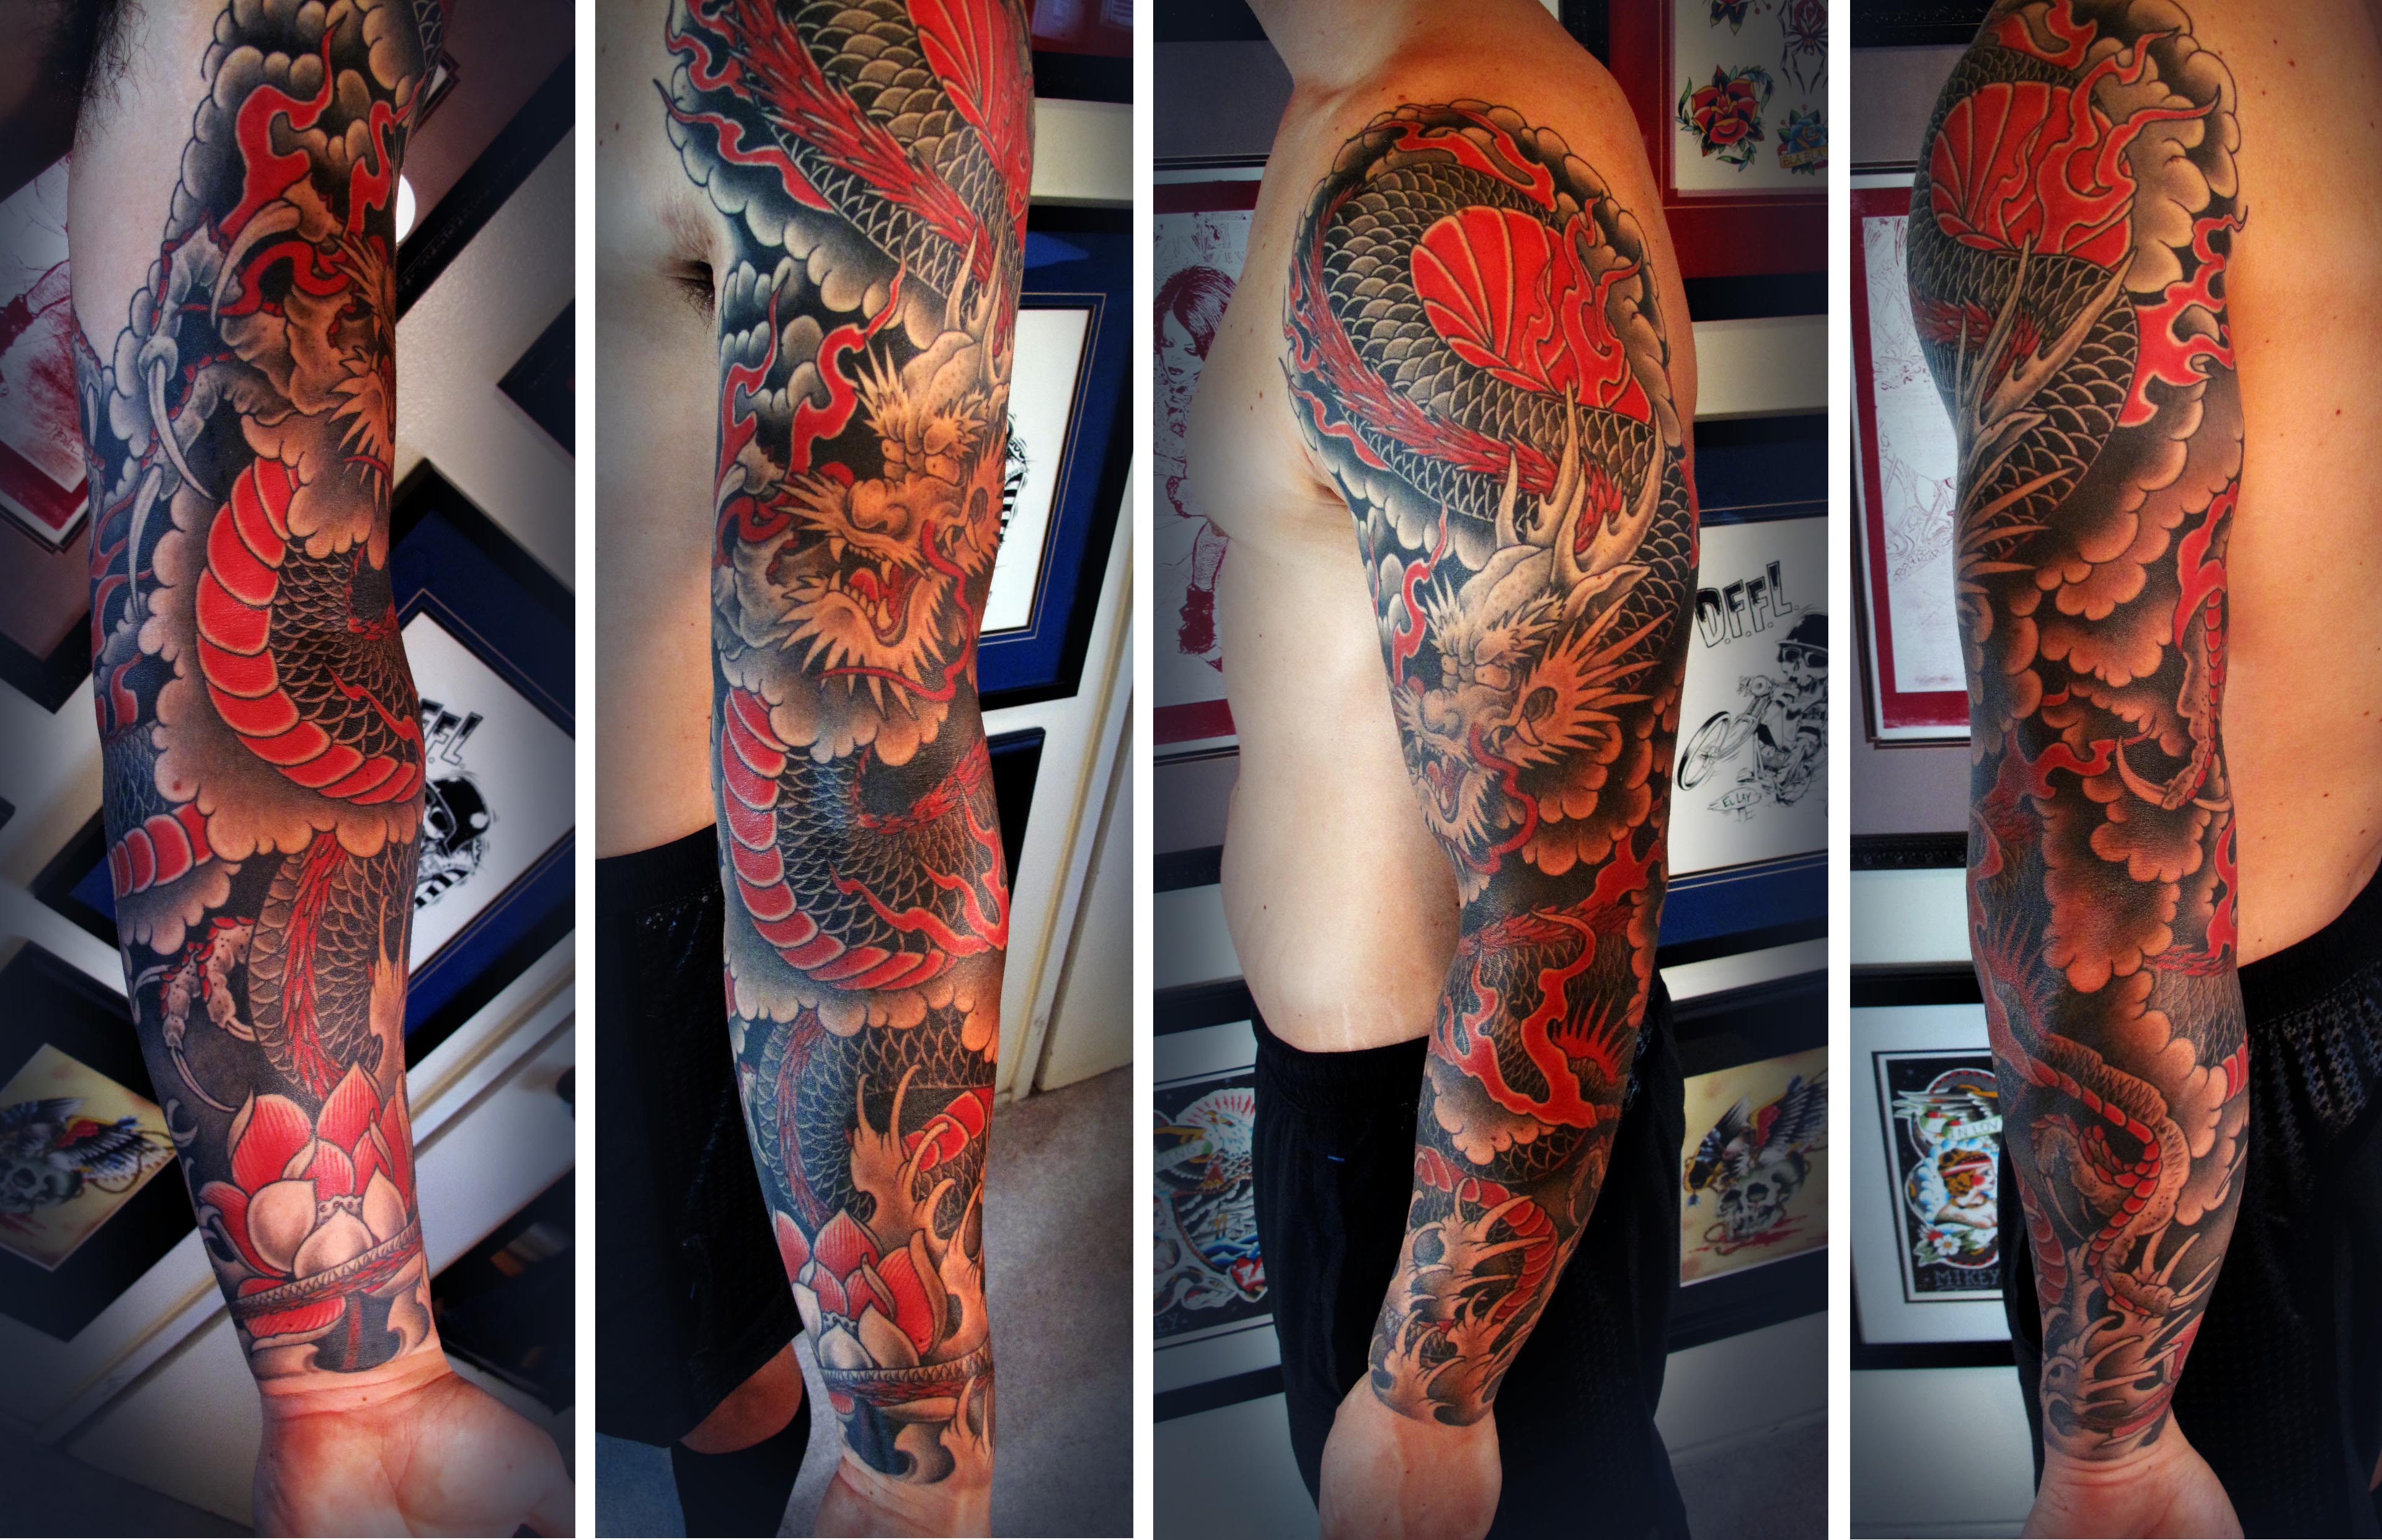 Black And Red Dragon With Lotus Flower Tattoo On Man Left Full Sleeve